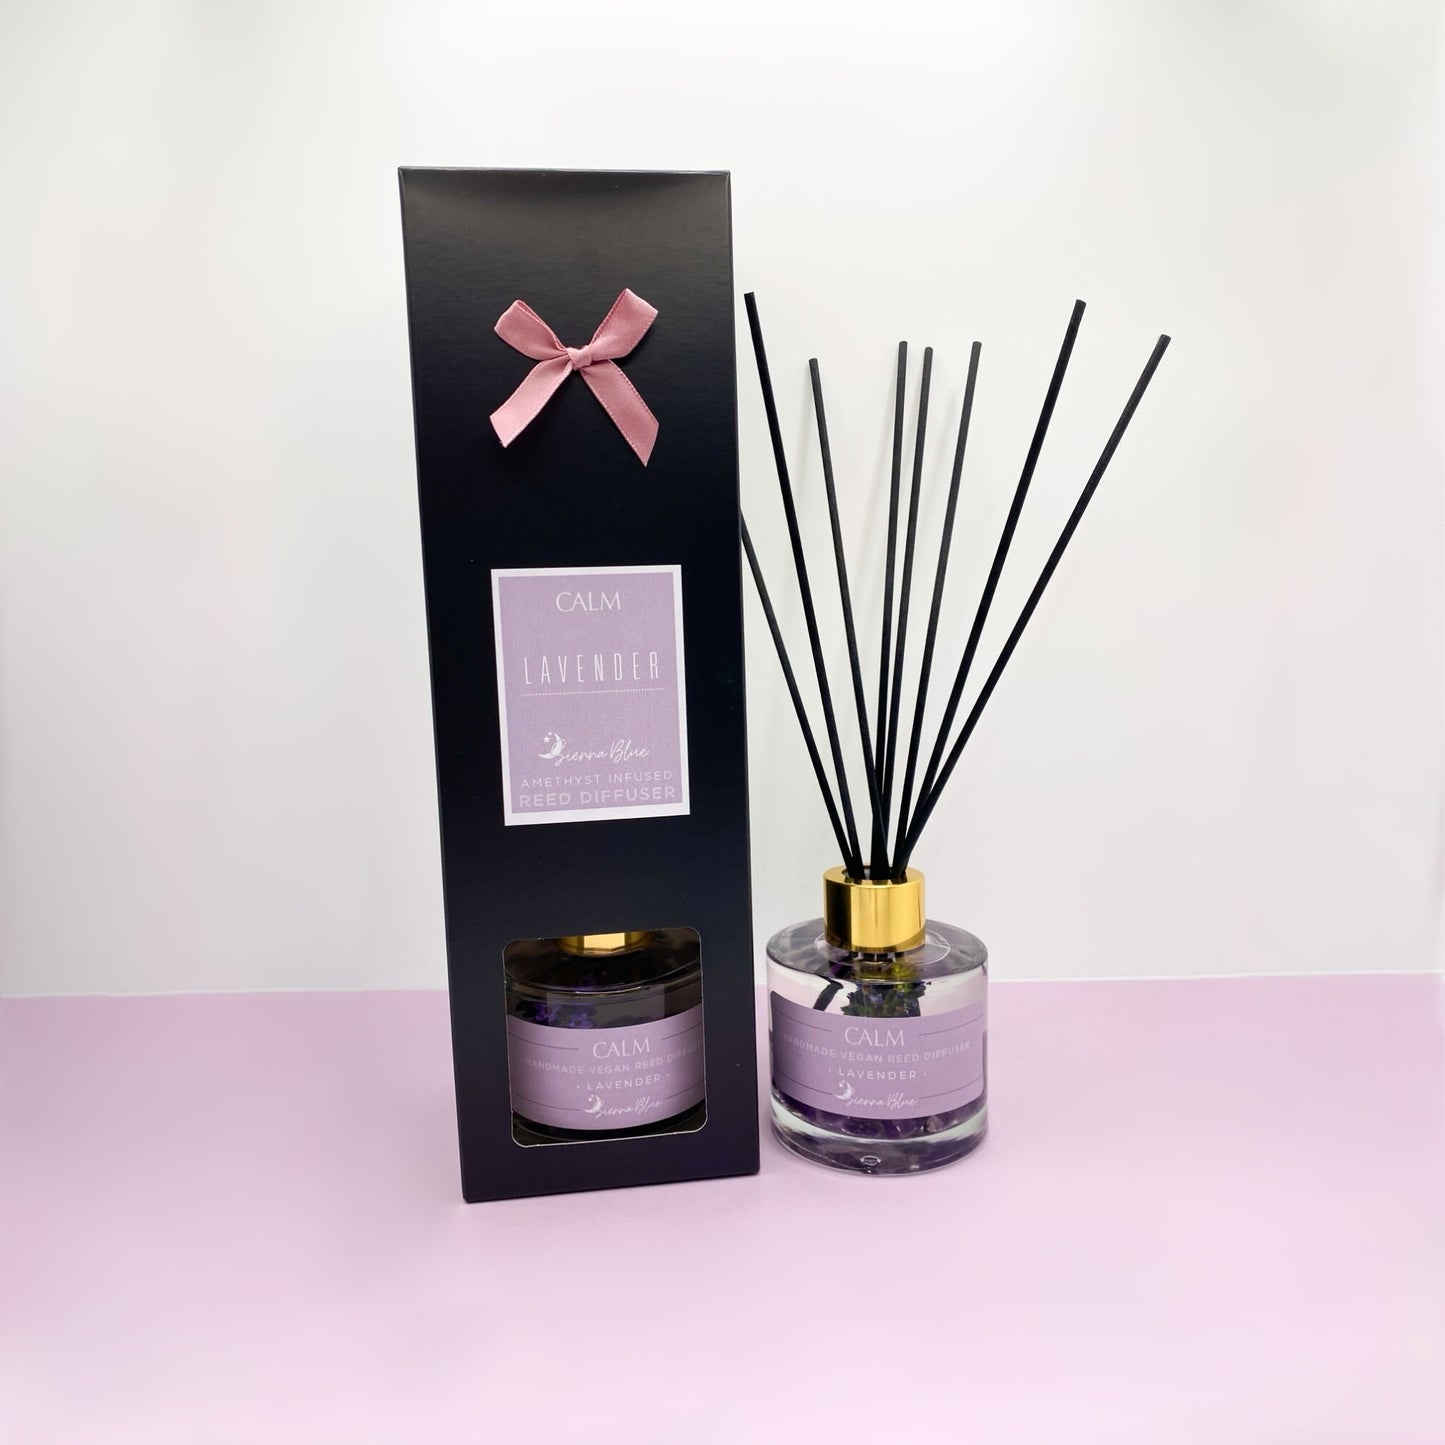 Calm candle and diffuser set